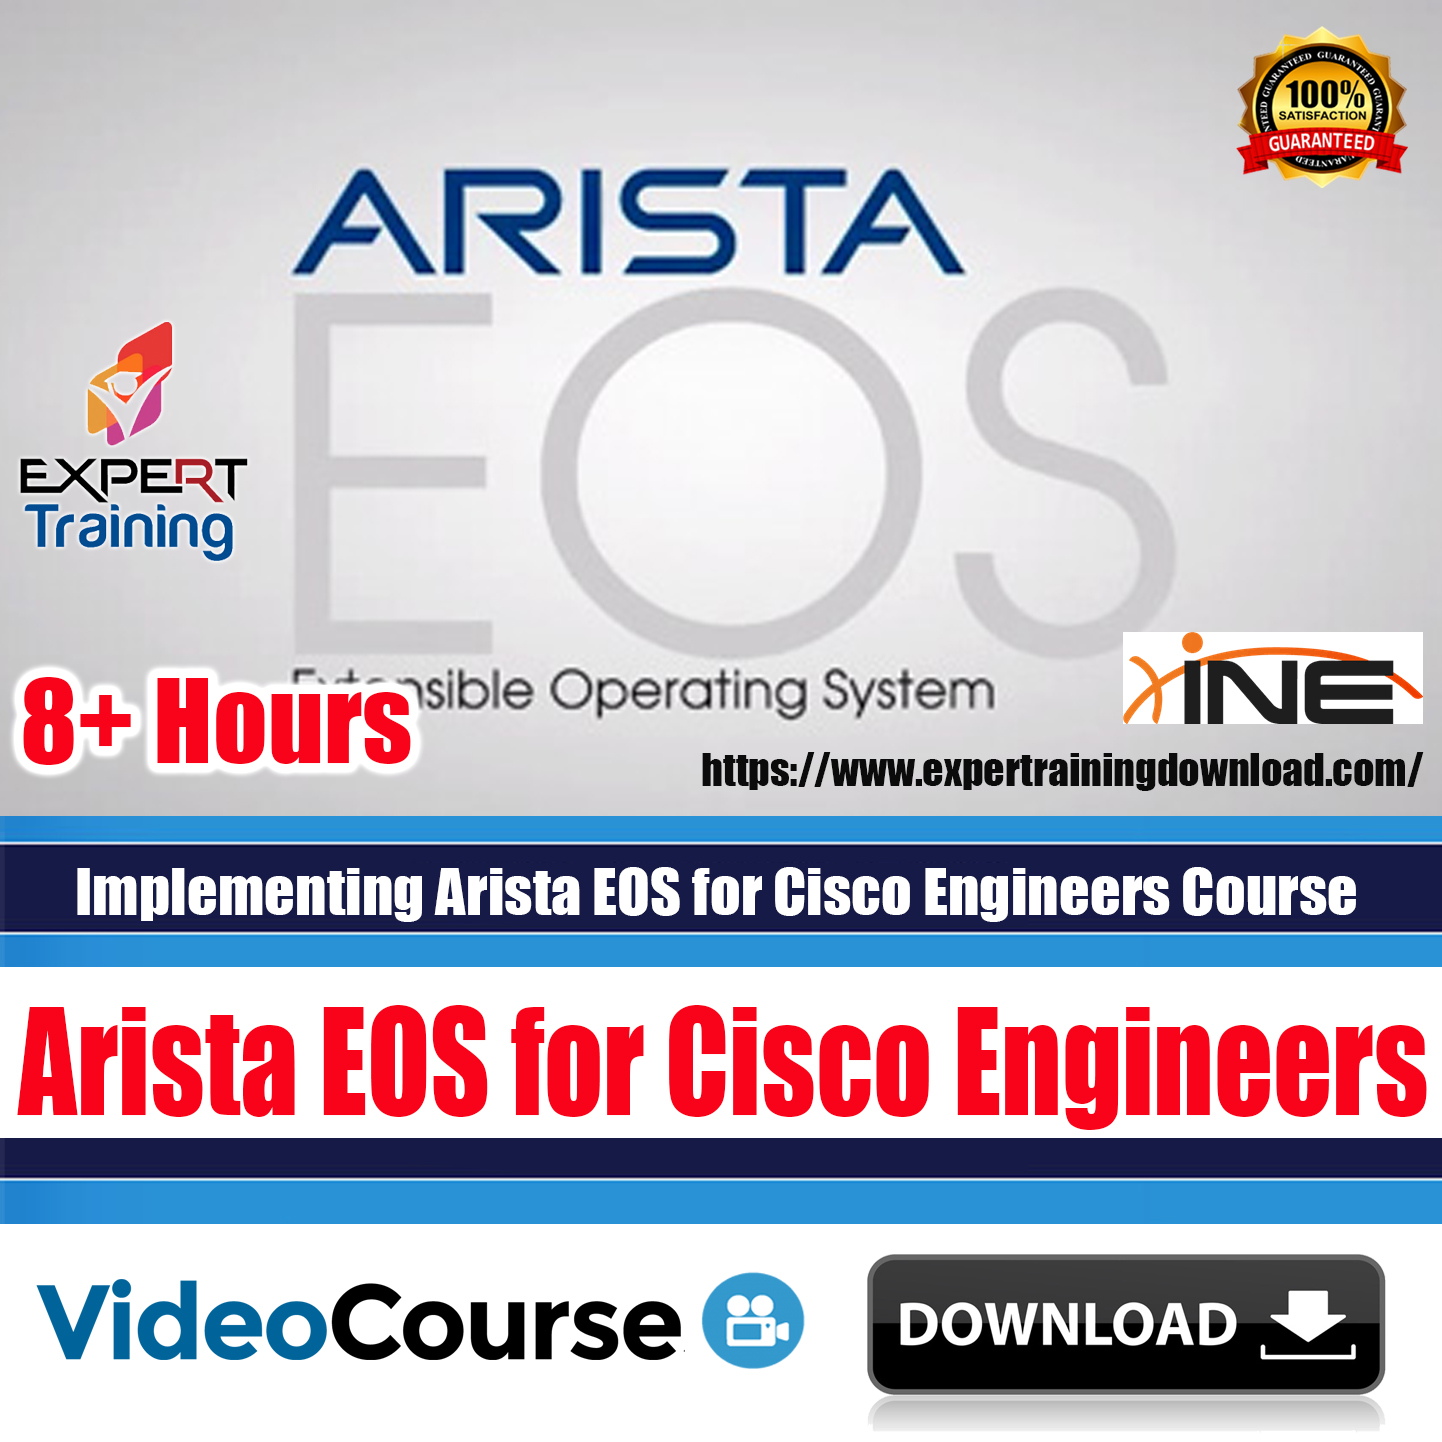 Implementing Arista EOS for Cisco Engineers Course